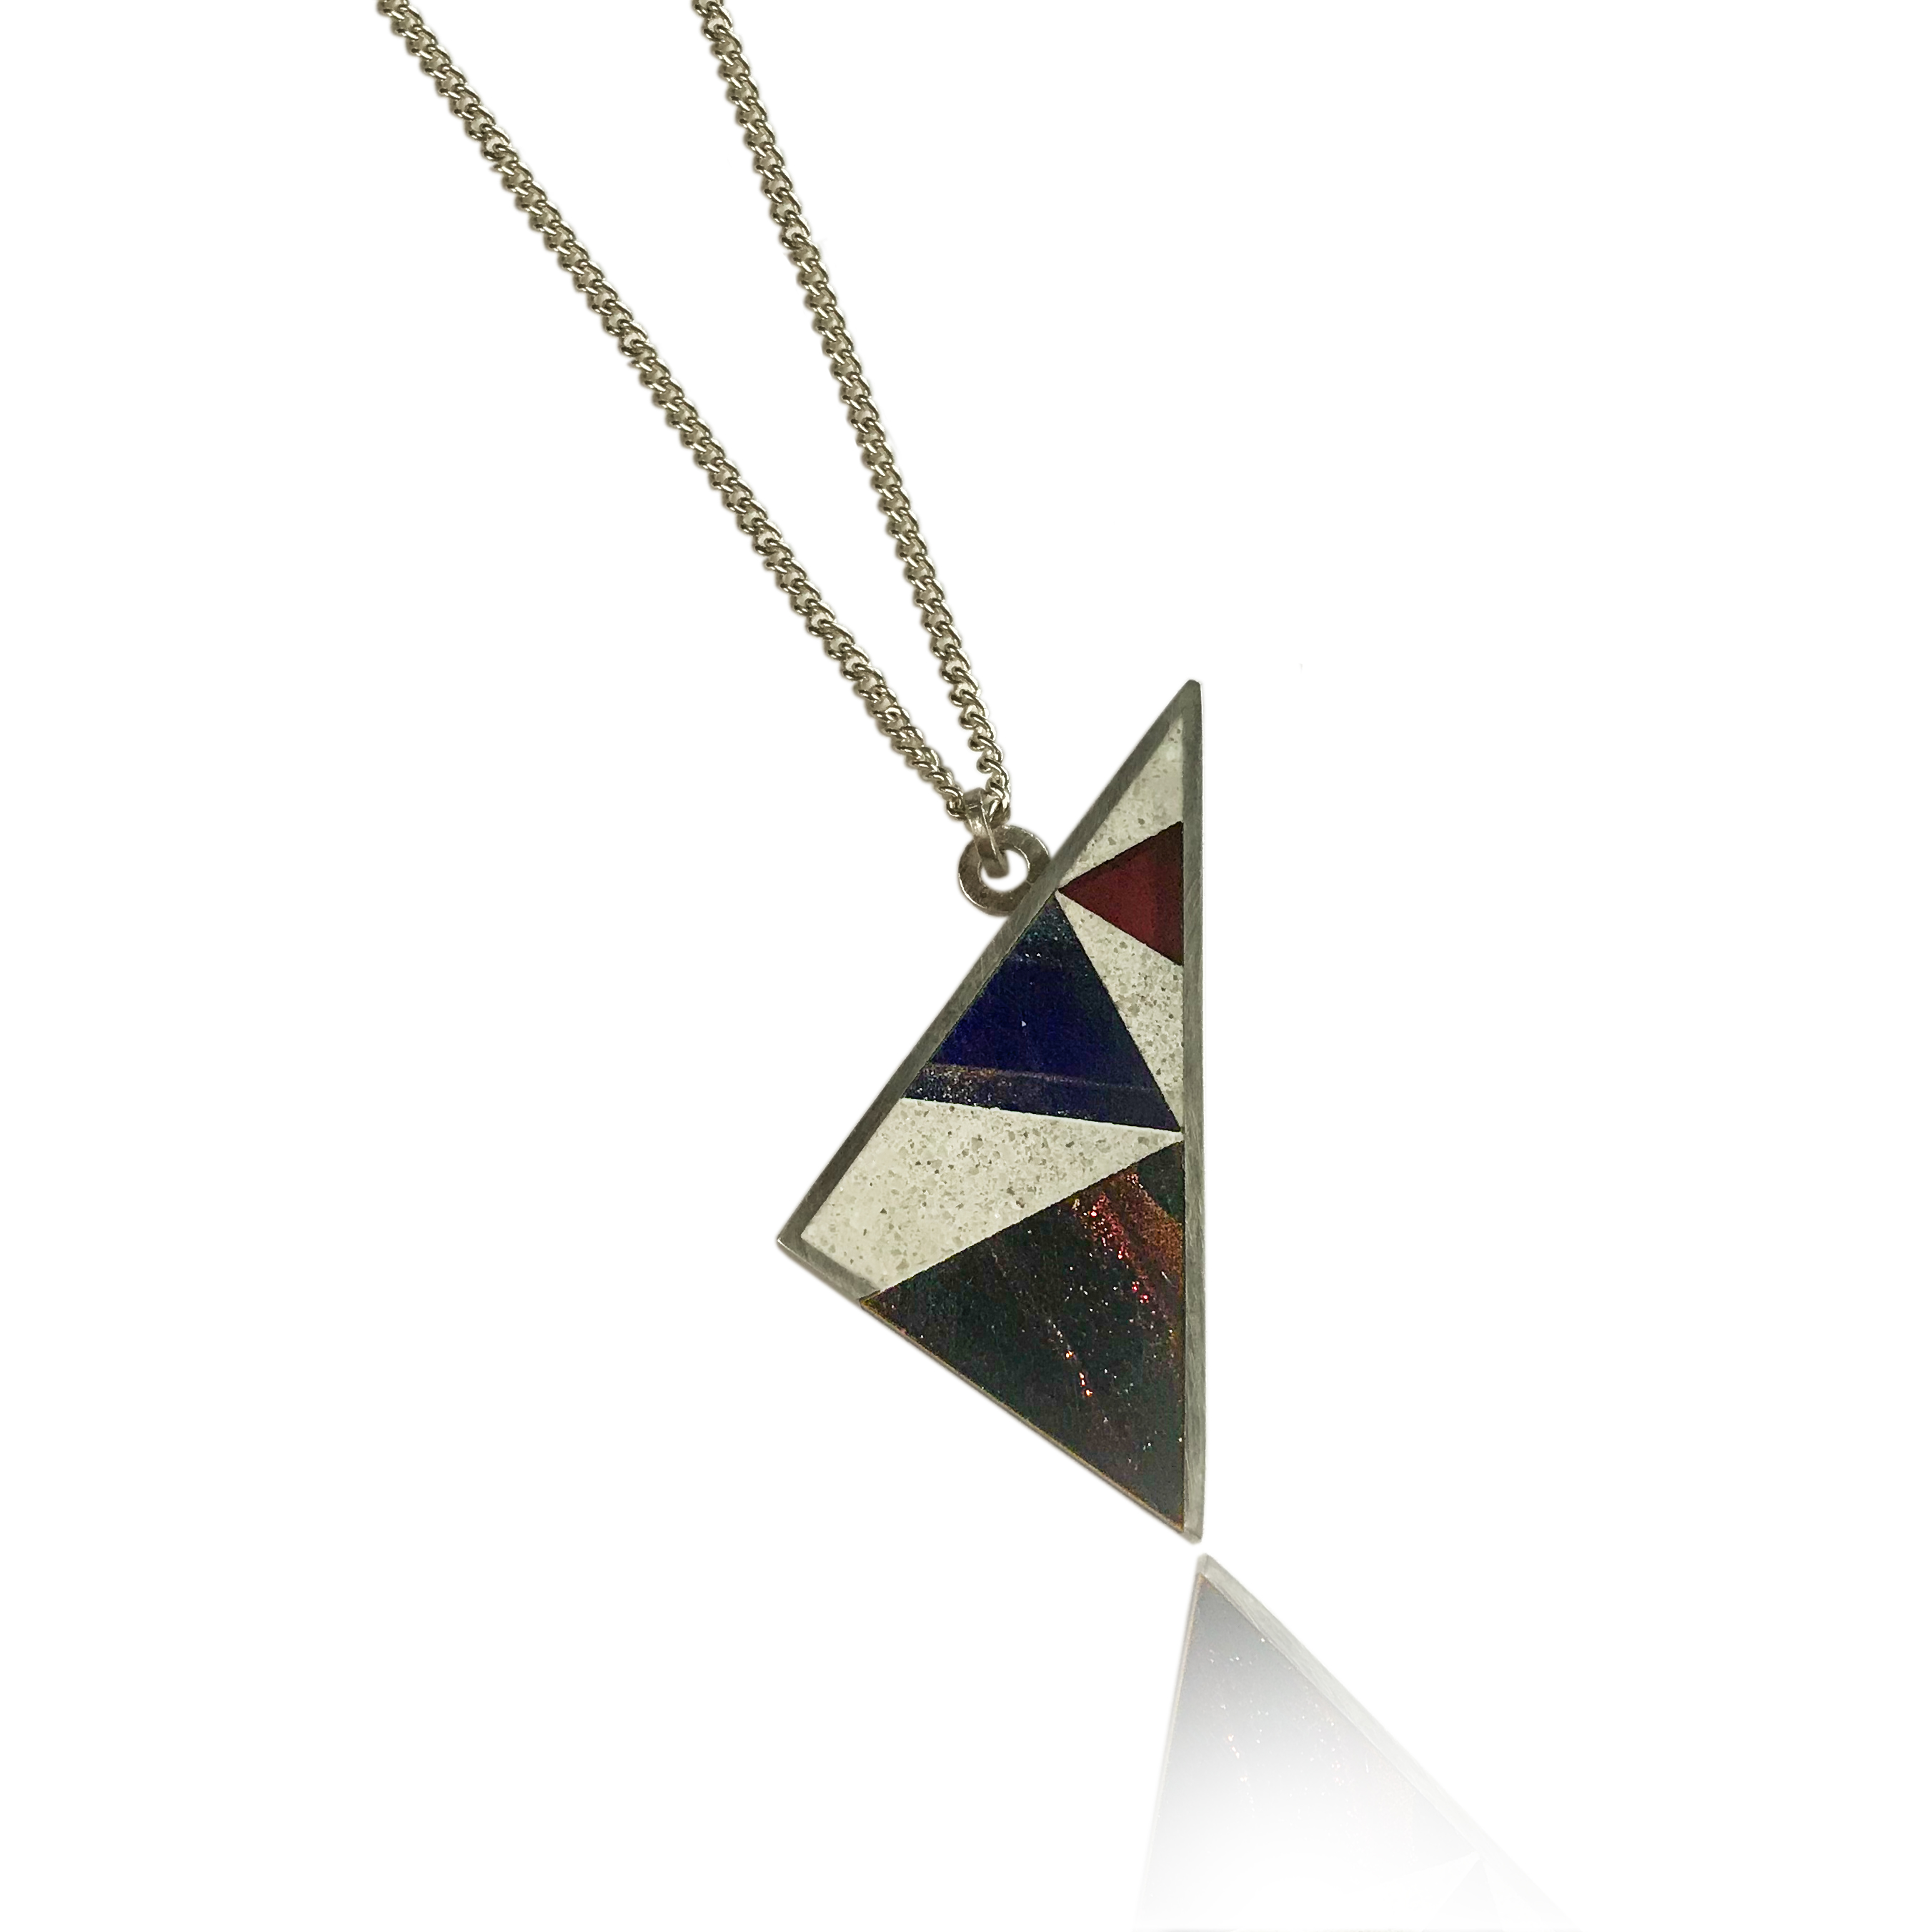 Abstract Pendant